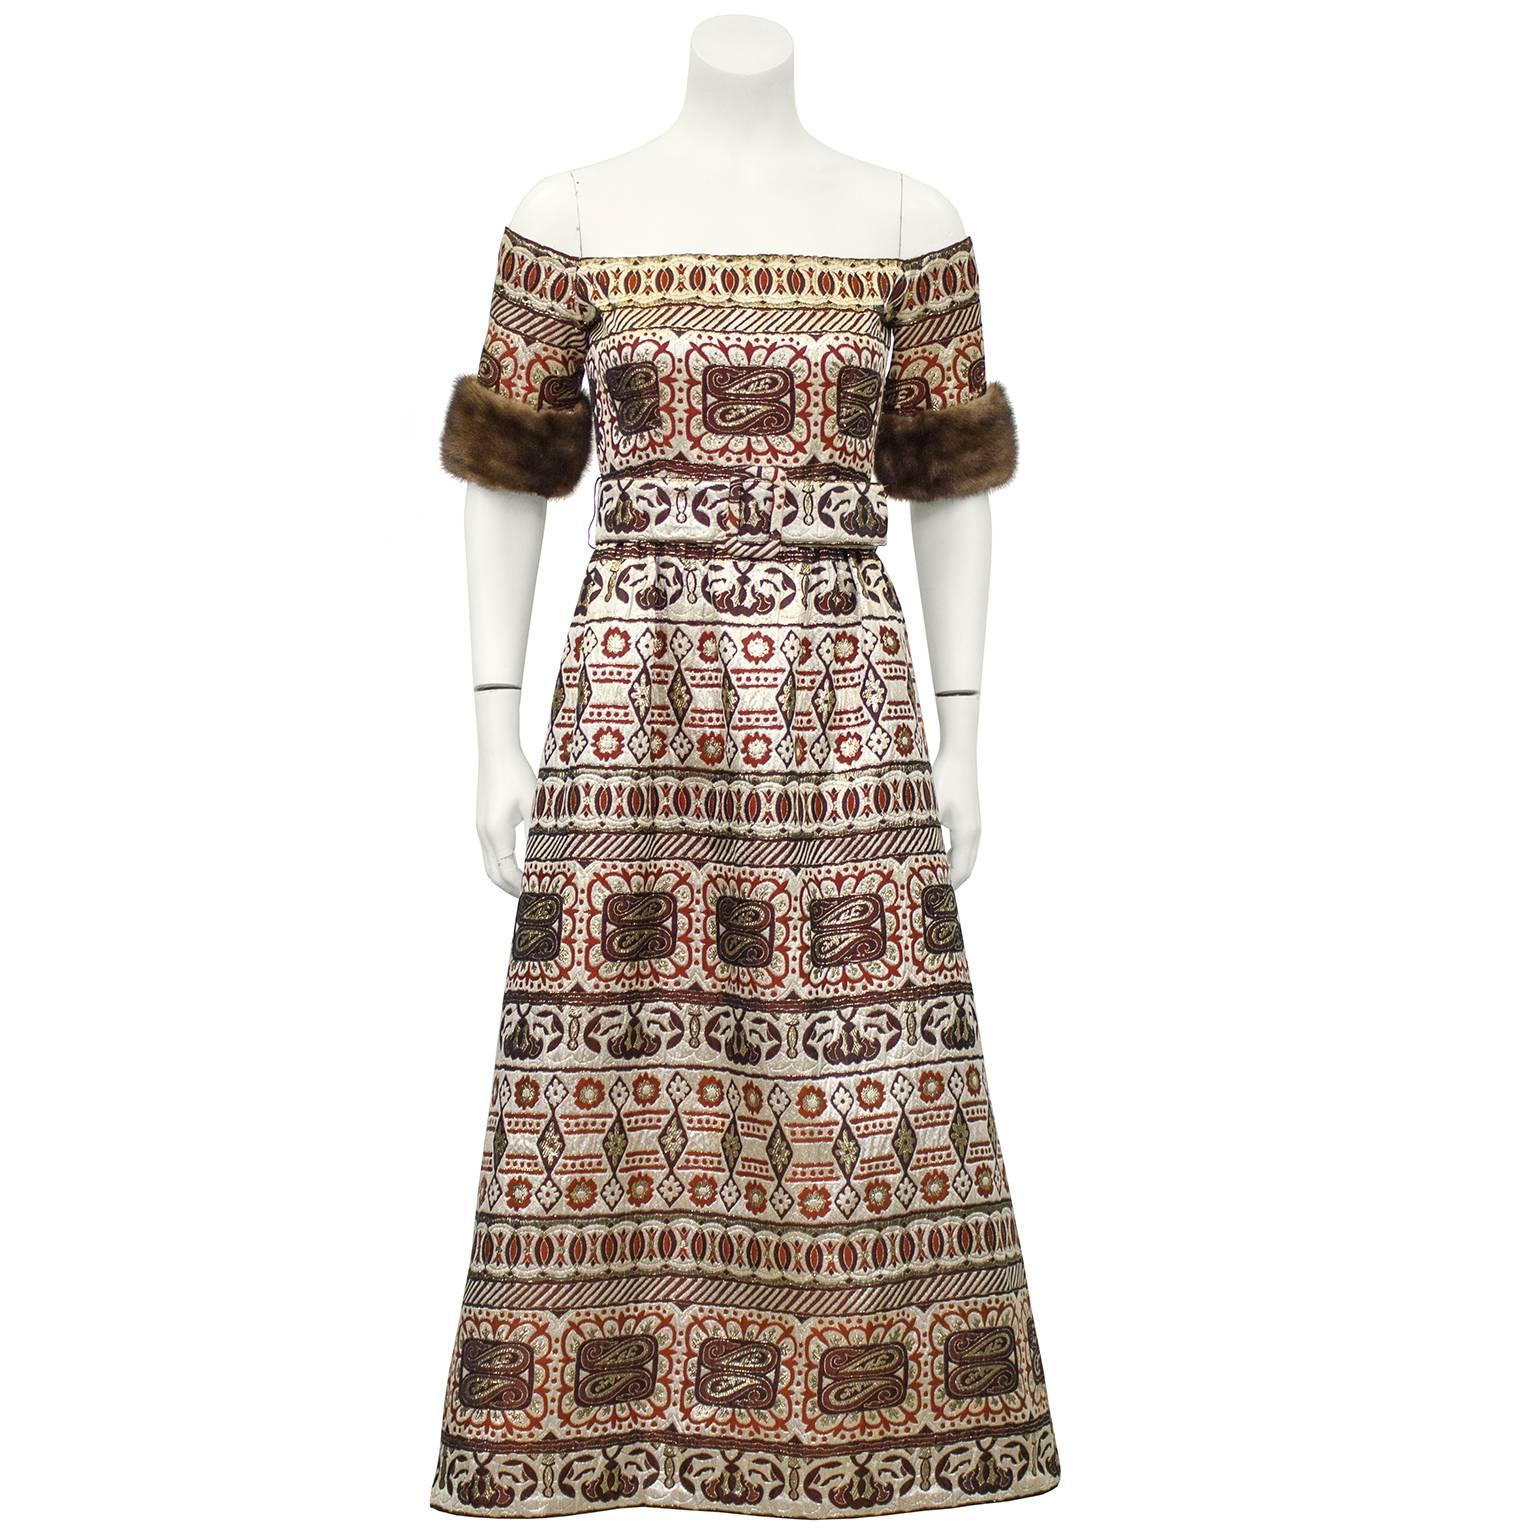 Opulent and beautiful Oscar de la Renta gown dating from the 1970s. Intricate brocade with tones of champagne, gold, brown and rust orange. Off the shoulders neck line, with short sleeves trimmed in brown mink. Matching adjustable empire height